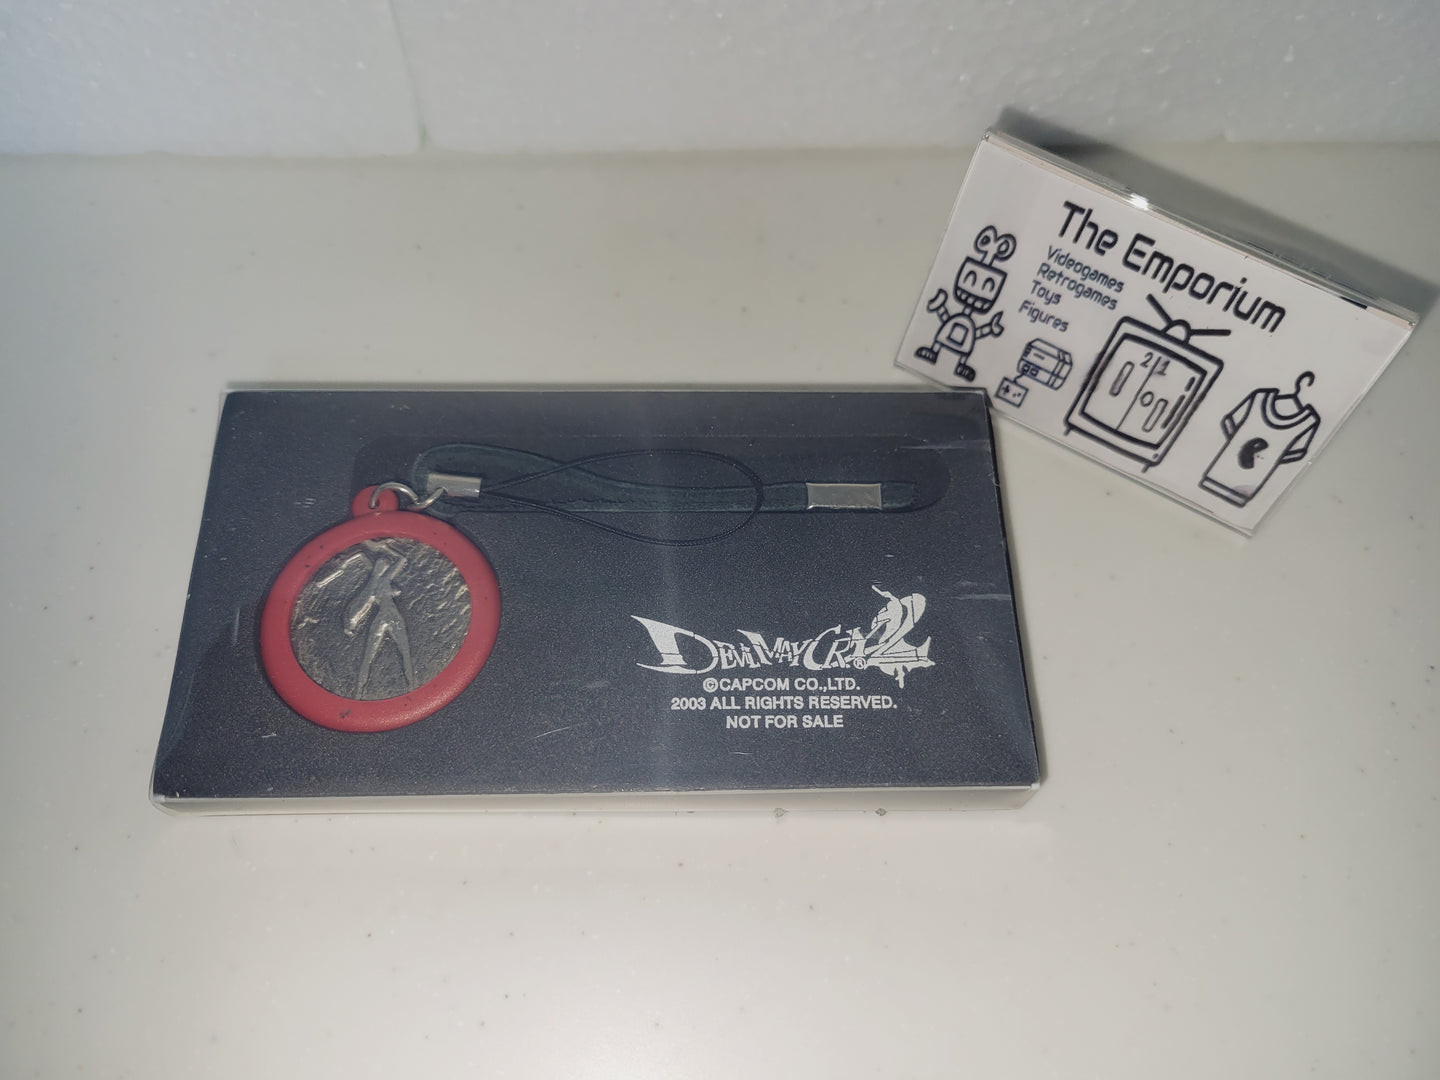 Devil May Cry 2 -not for sale- keychain - toy action figure gadgets